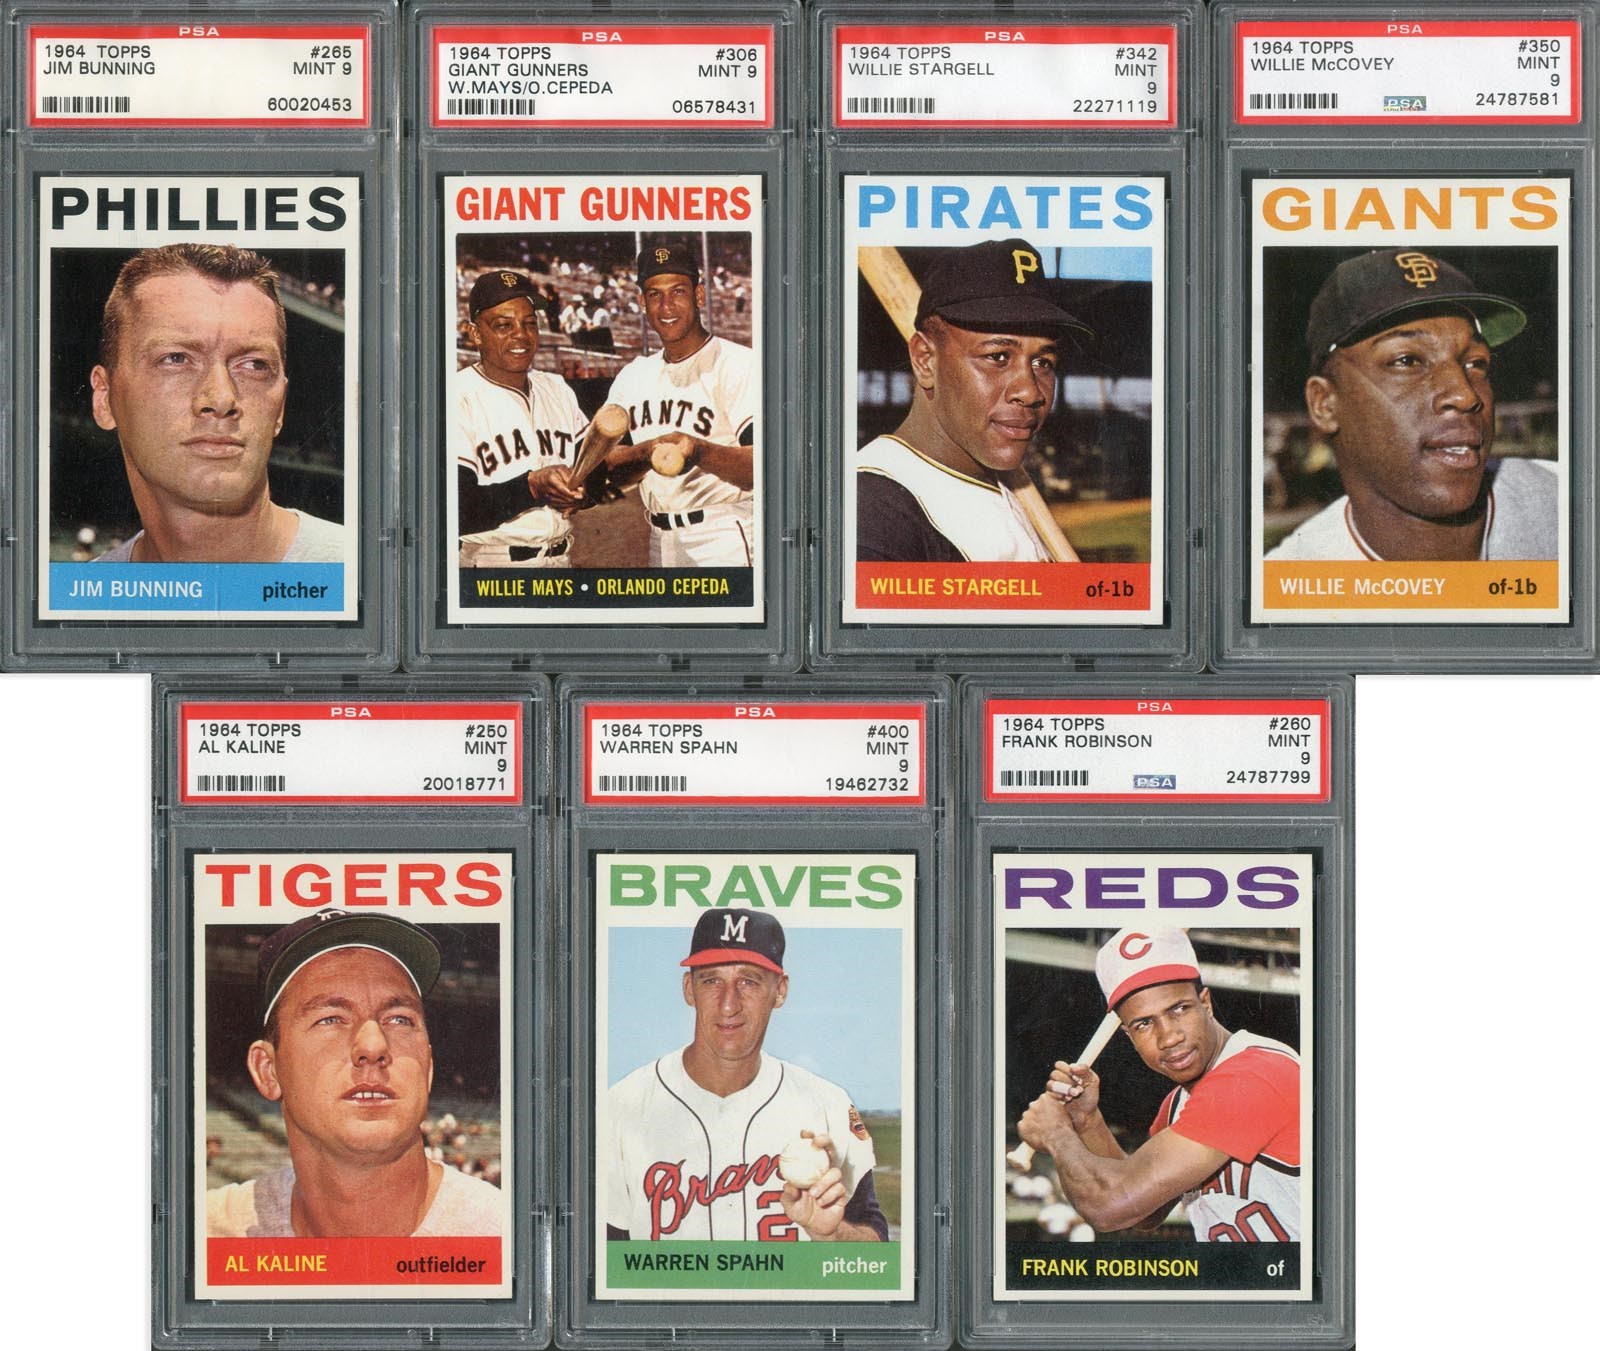 Baseball and Trading Cards - 1964 Topps Hall of Famer PSA MINT 9 Collection (7)